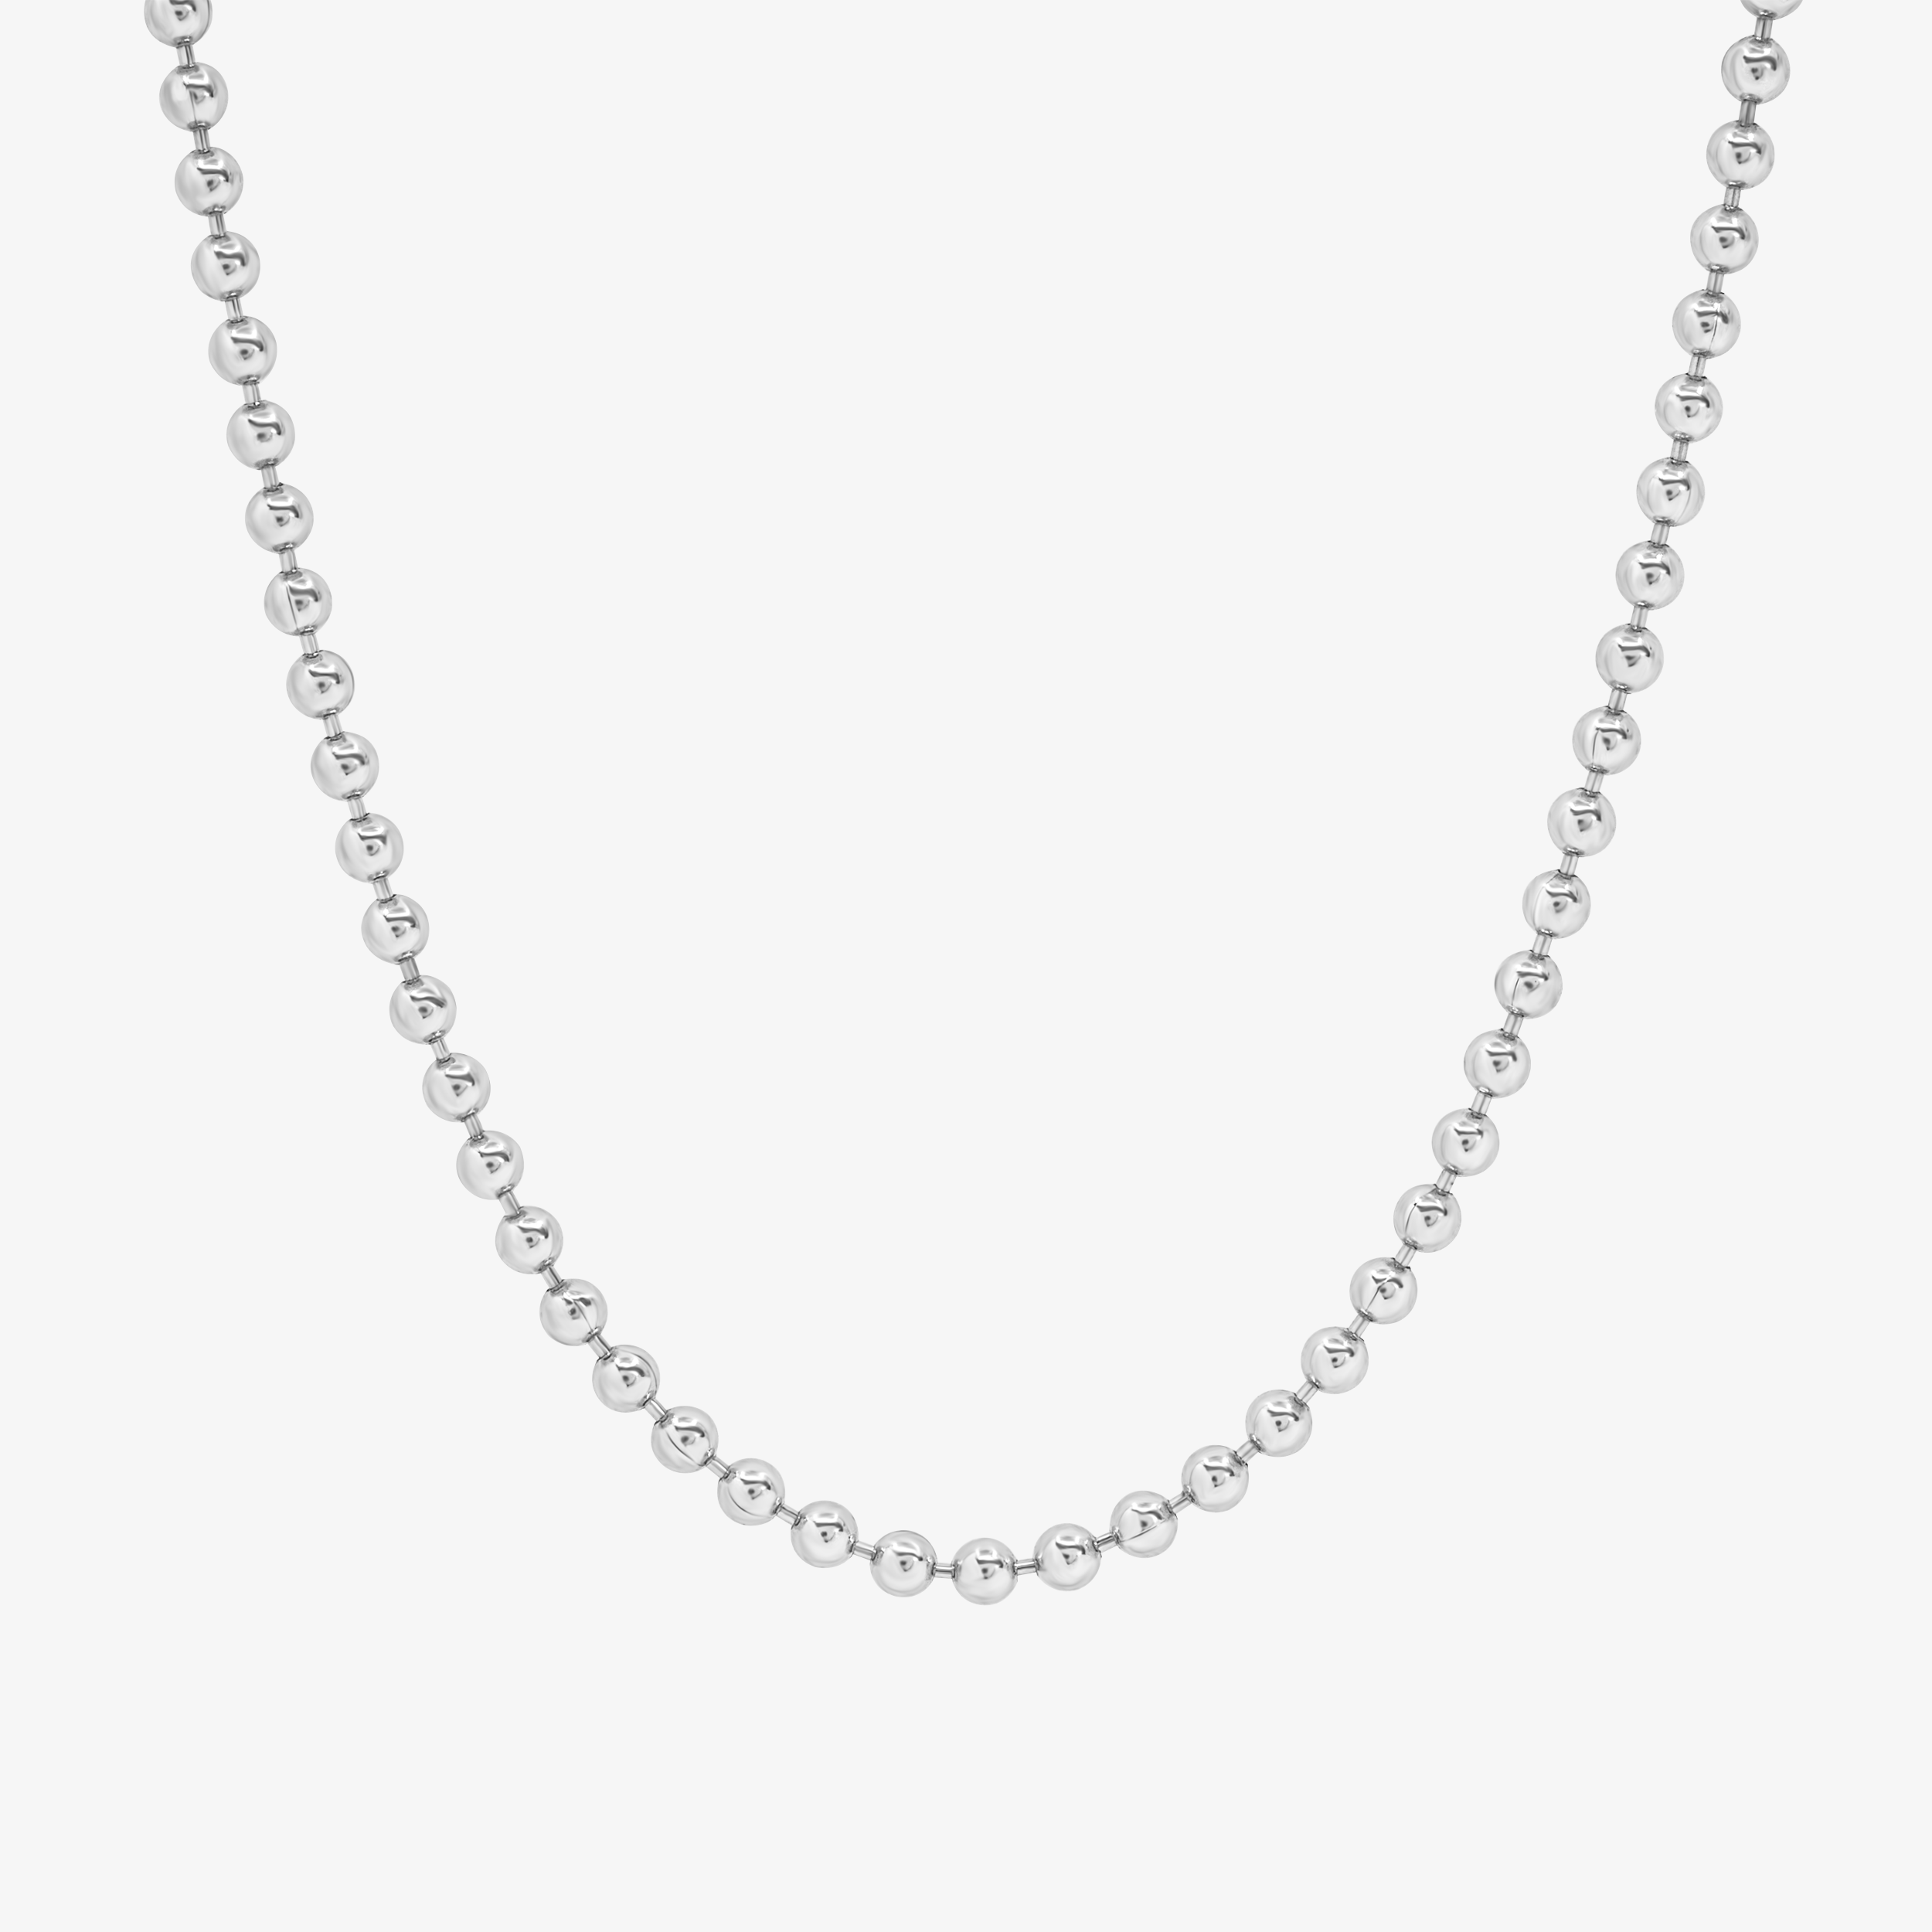 1.8mm Beaded Chain In 14K Solid White Gold